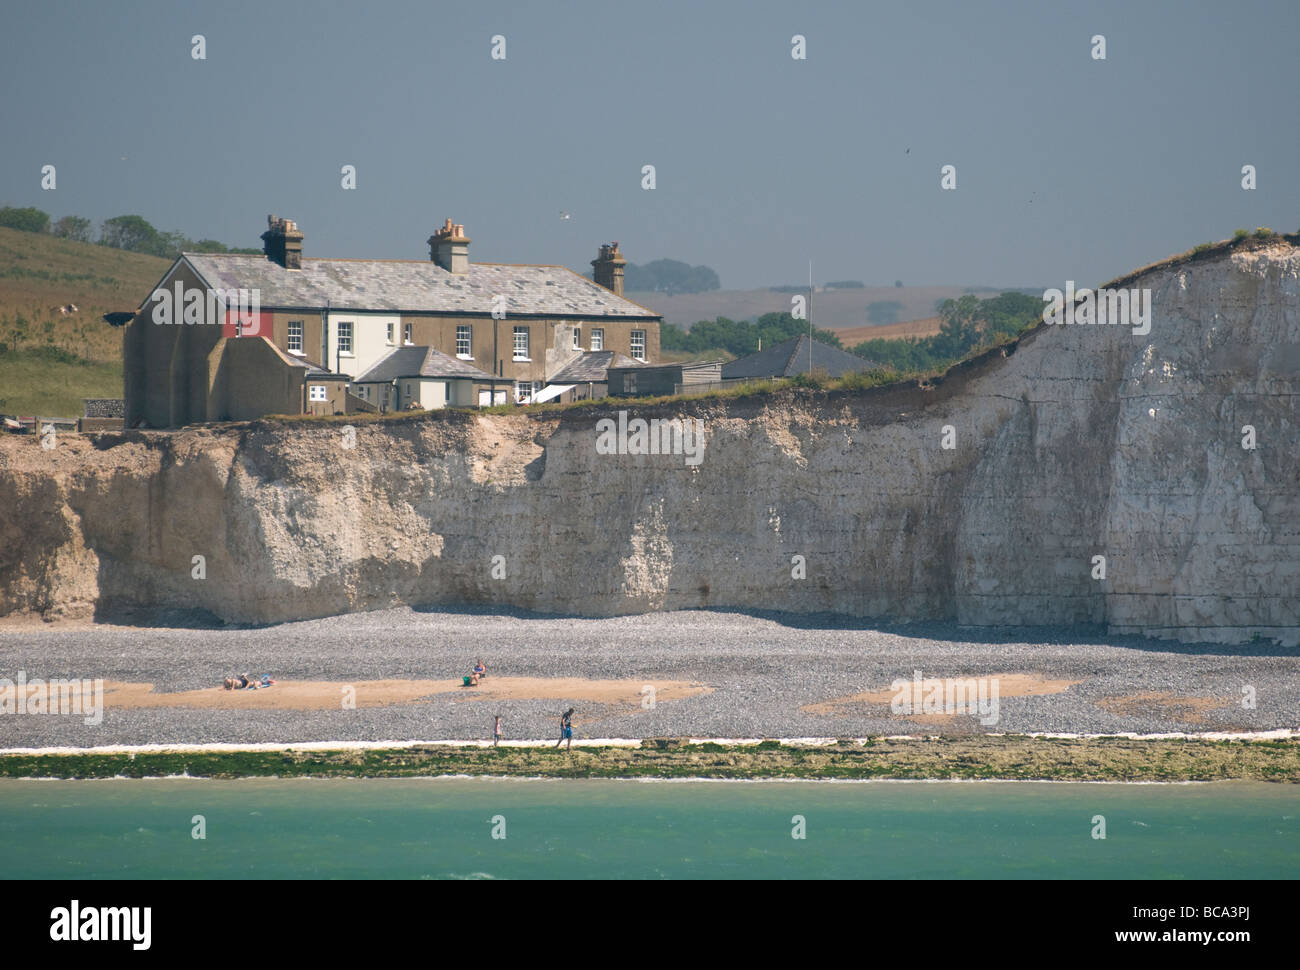 Old fisherman's houses on the cliff edge at Birling Gap, East Sussex, England. Stock Photo